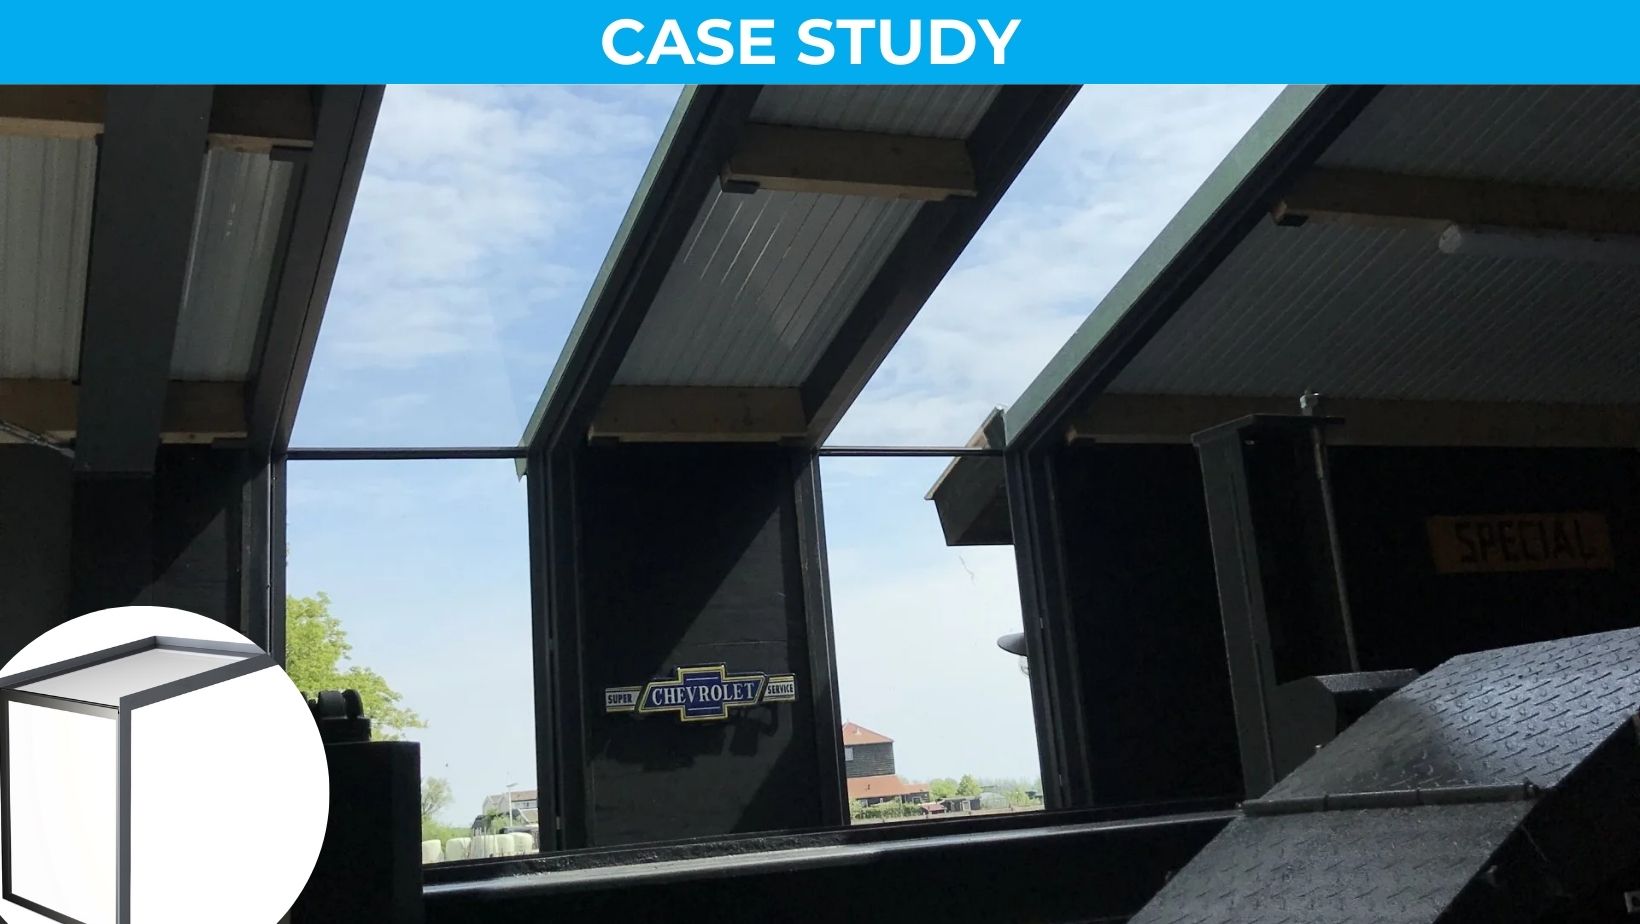 Eaves Flushglaze Rooflight Creates Feature For Commercial Tuning Shop